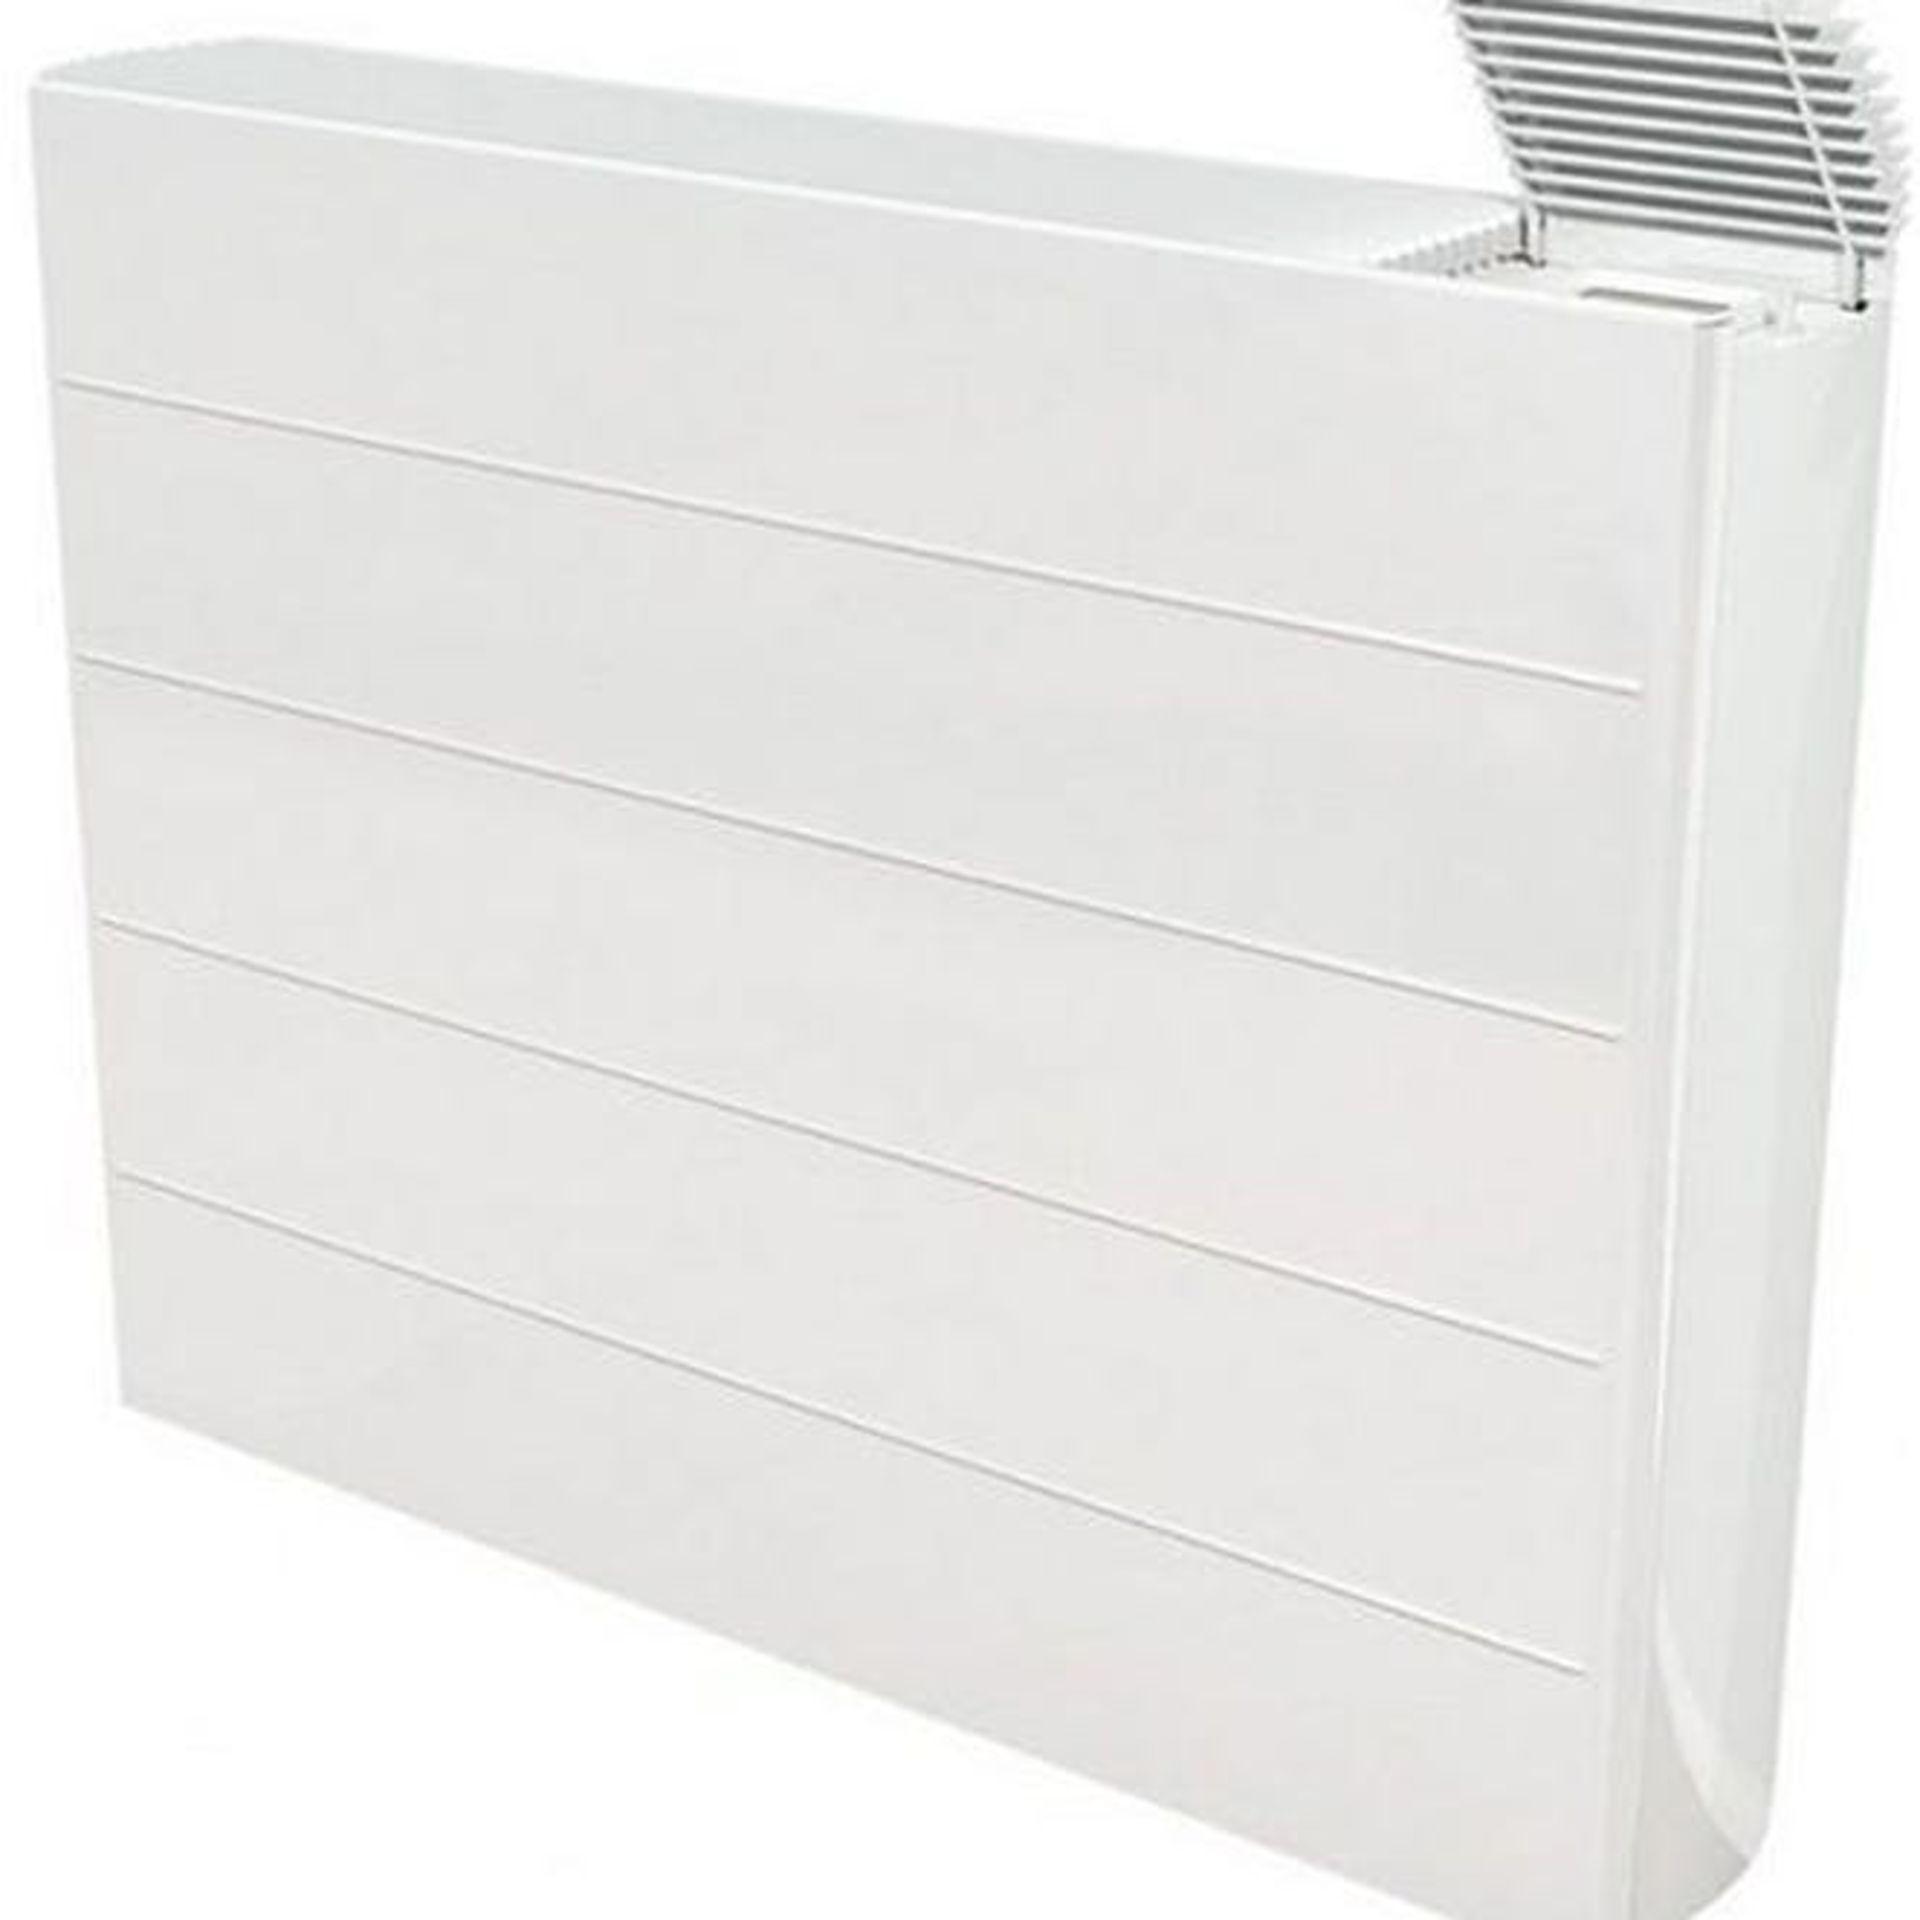 (QP6) Myson iVector IV1402PBC MKII - 600 x 1200mm - 2 Pipe Fan Convector Heater - White. RRP £... (